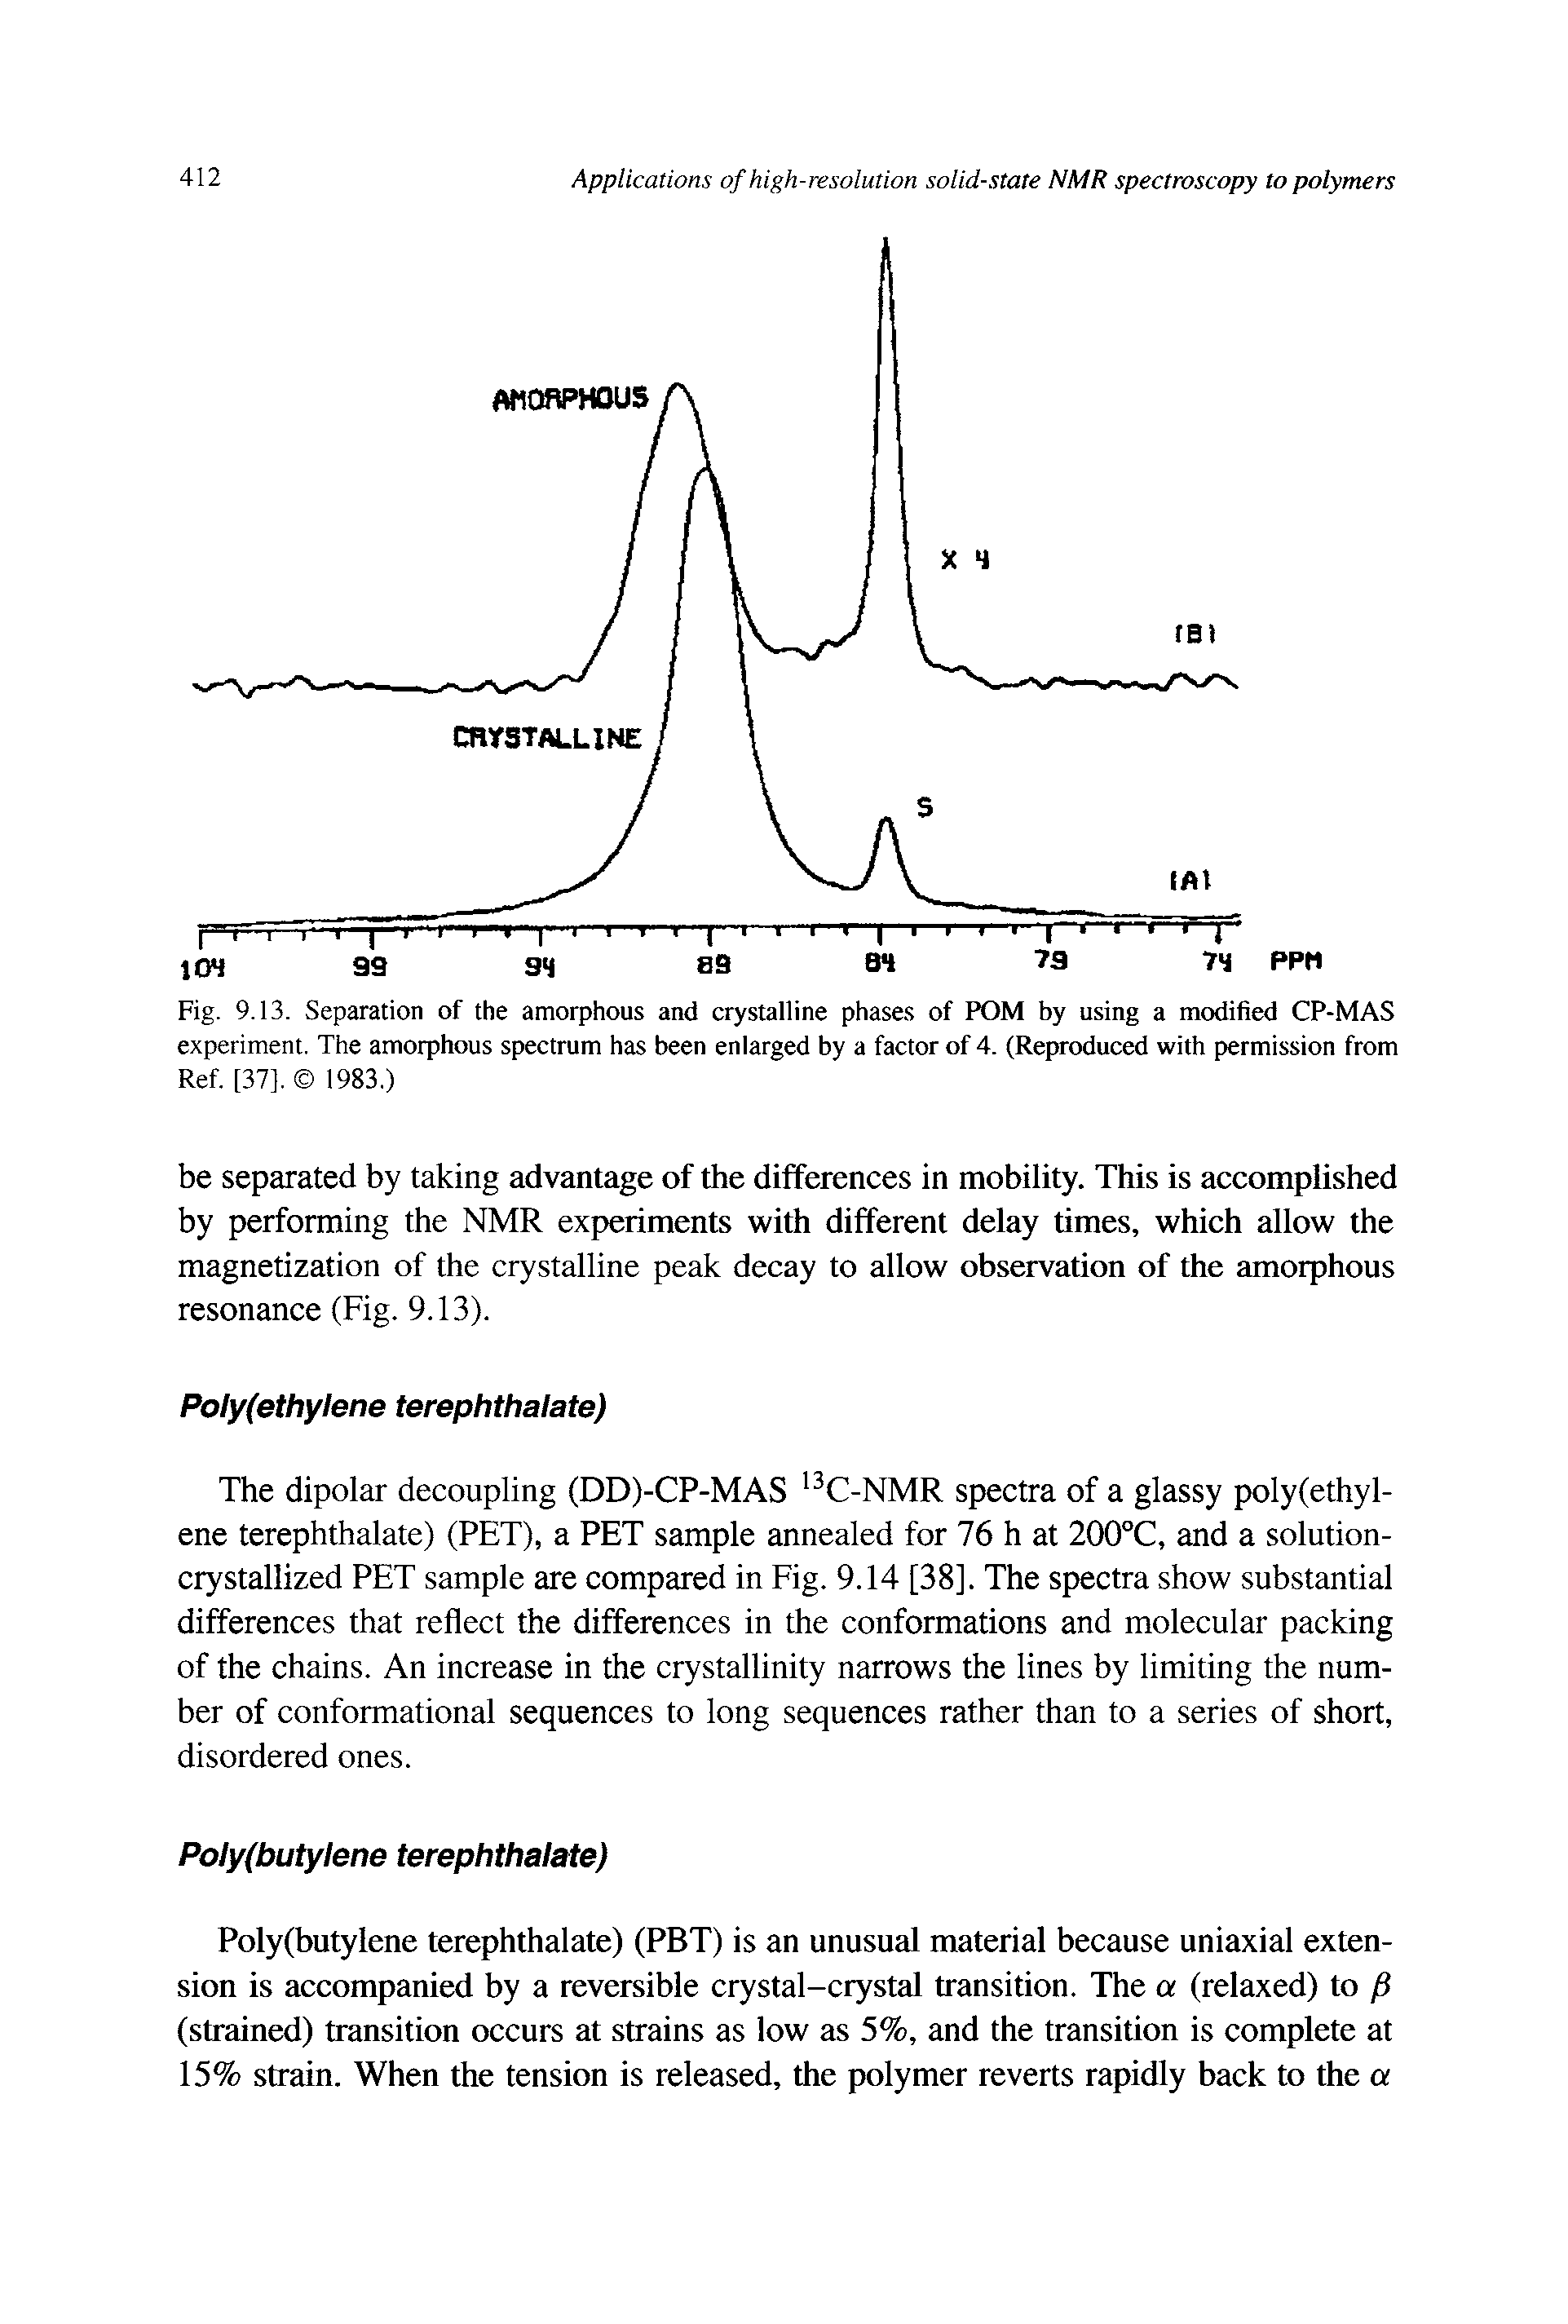 Fig. 9.13. Separation of the amorphous and crystalline phases of POM by using a modified CP-MAS experiment. The amorphous spectrum has been enlarged by a factor of 4. (Reproduced with permission from Ref. [37]. 1983.)...